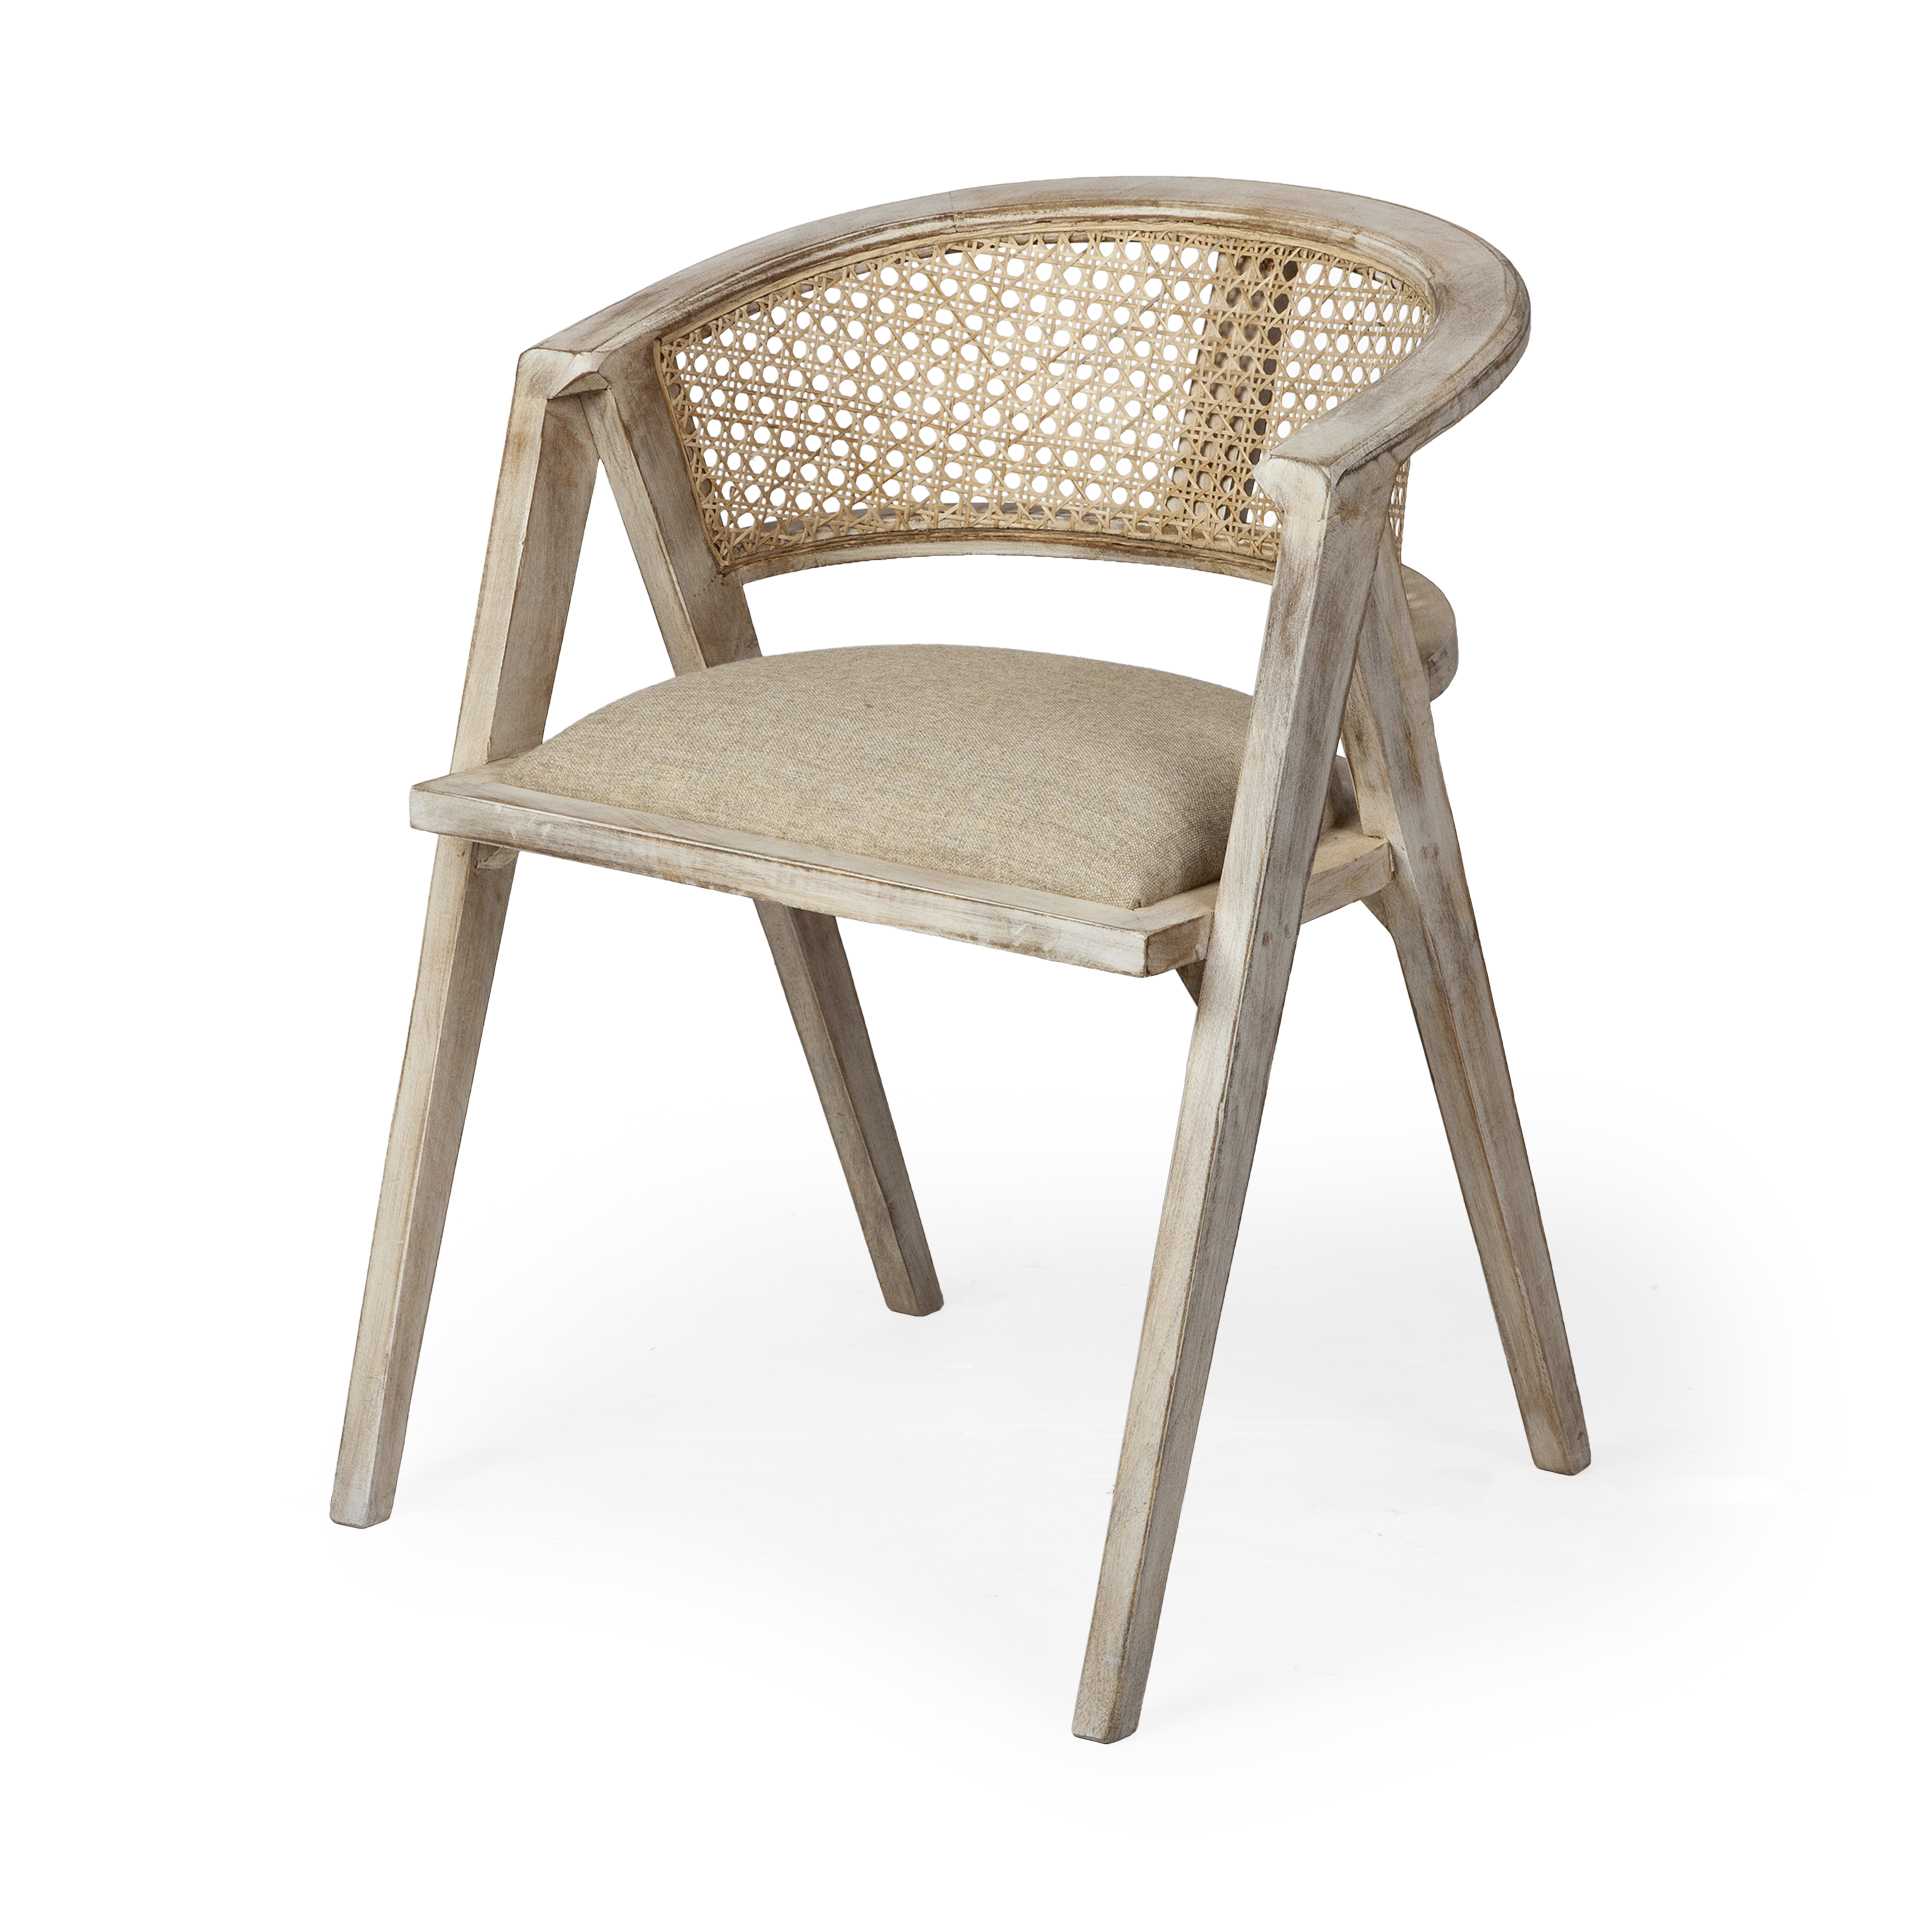 Natural Linen Seat with Blonde Wooden Frame Dining Chair